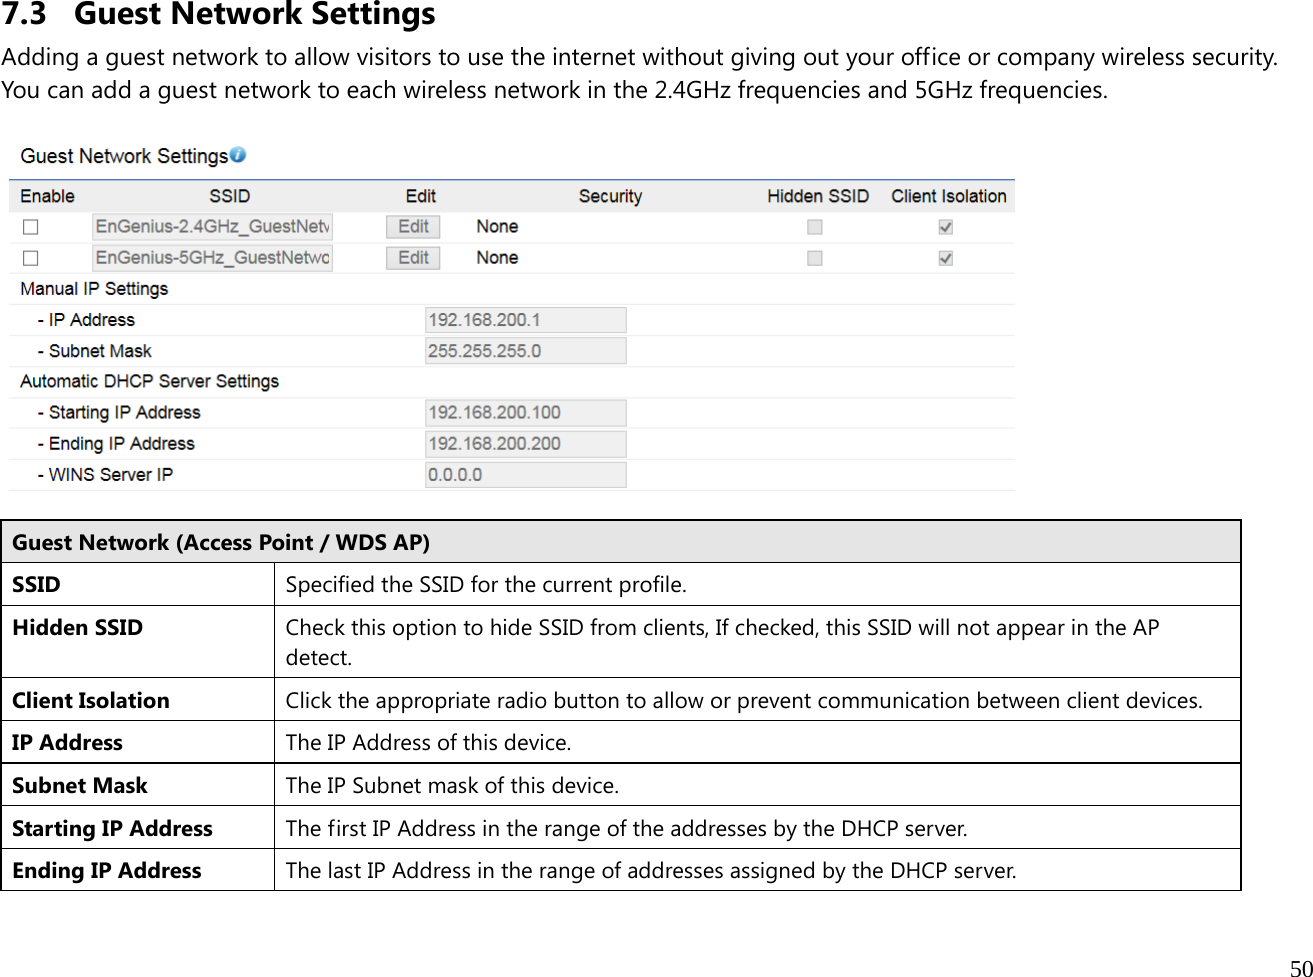  50  7.3 Guest Network Settings Adding a guest network to allow visitors to use the internet without giving out your office or company wireless security. You can add a guest network to each wireless network in the 2.4GHz frequencies and 5GHz frequencies.    Guest Network (Access Point / WDS AP)SSID  Specified the SSID for the current profile. Hidden SSID  Check this option to hide SSID from clients, If checked, this SSID will not appear in the AP detect. Client Isolation  Click the appropriate radio button to allow or prevent communication between client devices. IP Address  The IP Address of this device. Subnet Mask  The IP Subnet mask of this device.Starting IP Address  The first IP Address in the range of the addresses by the DHCP server. Ending IP Address  The last IP Address in the range of addresses assigned by the DHCP server.  